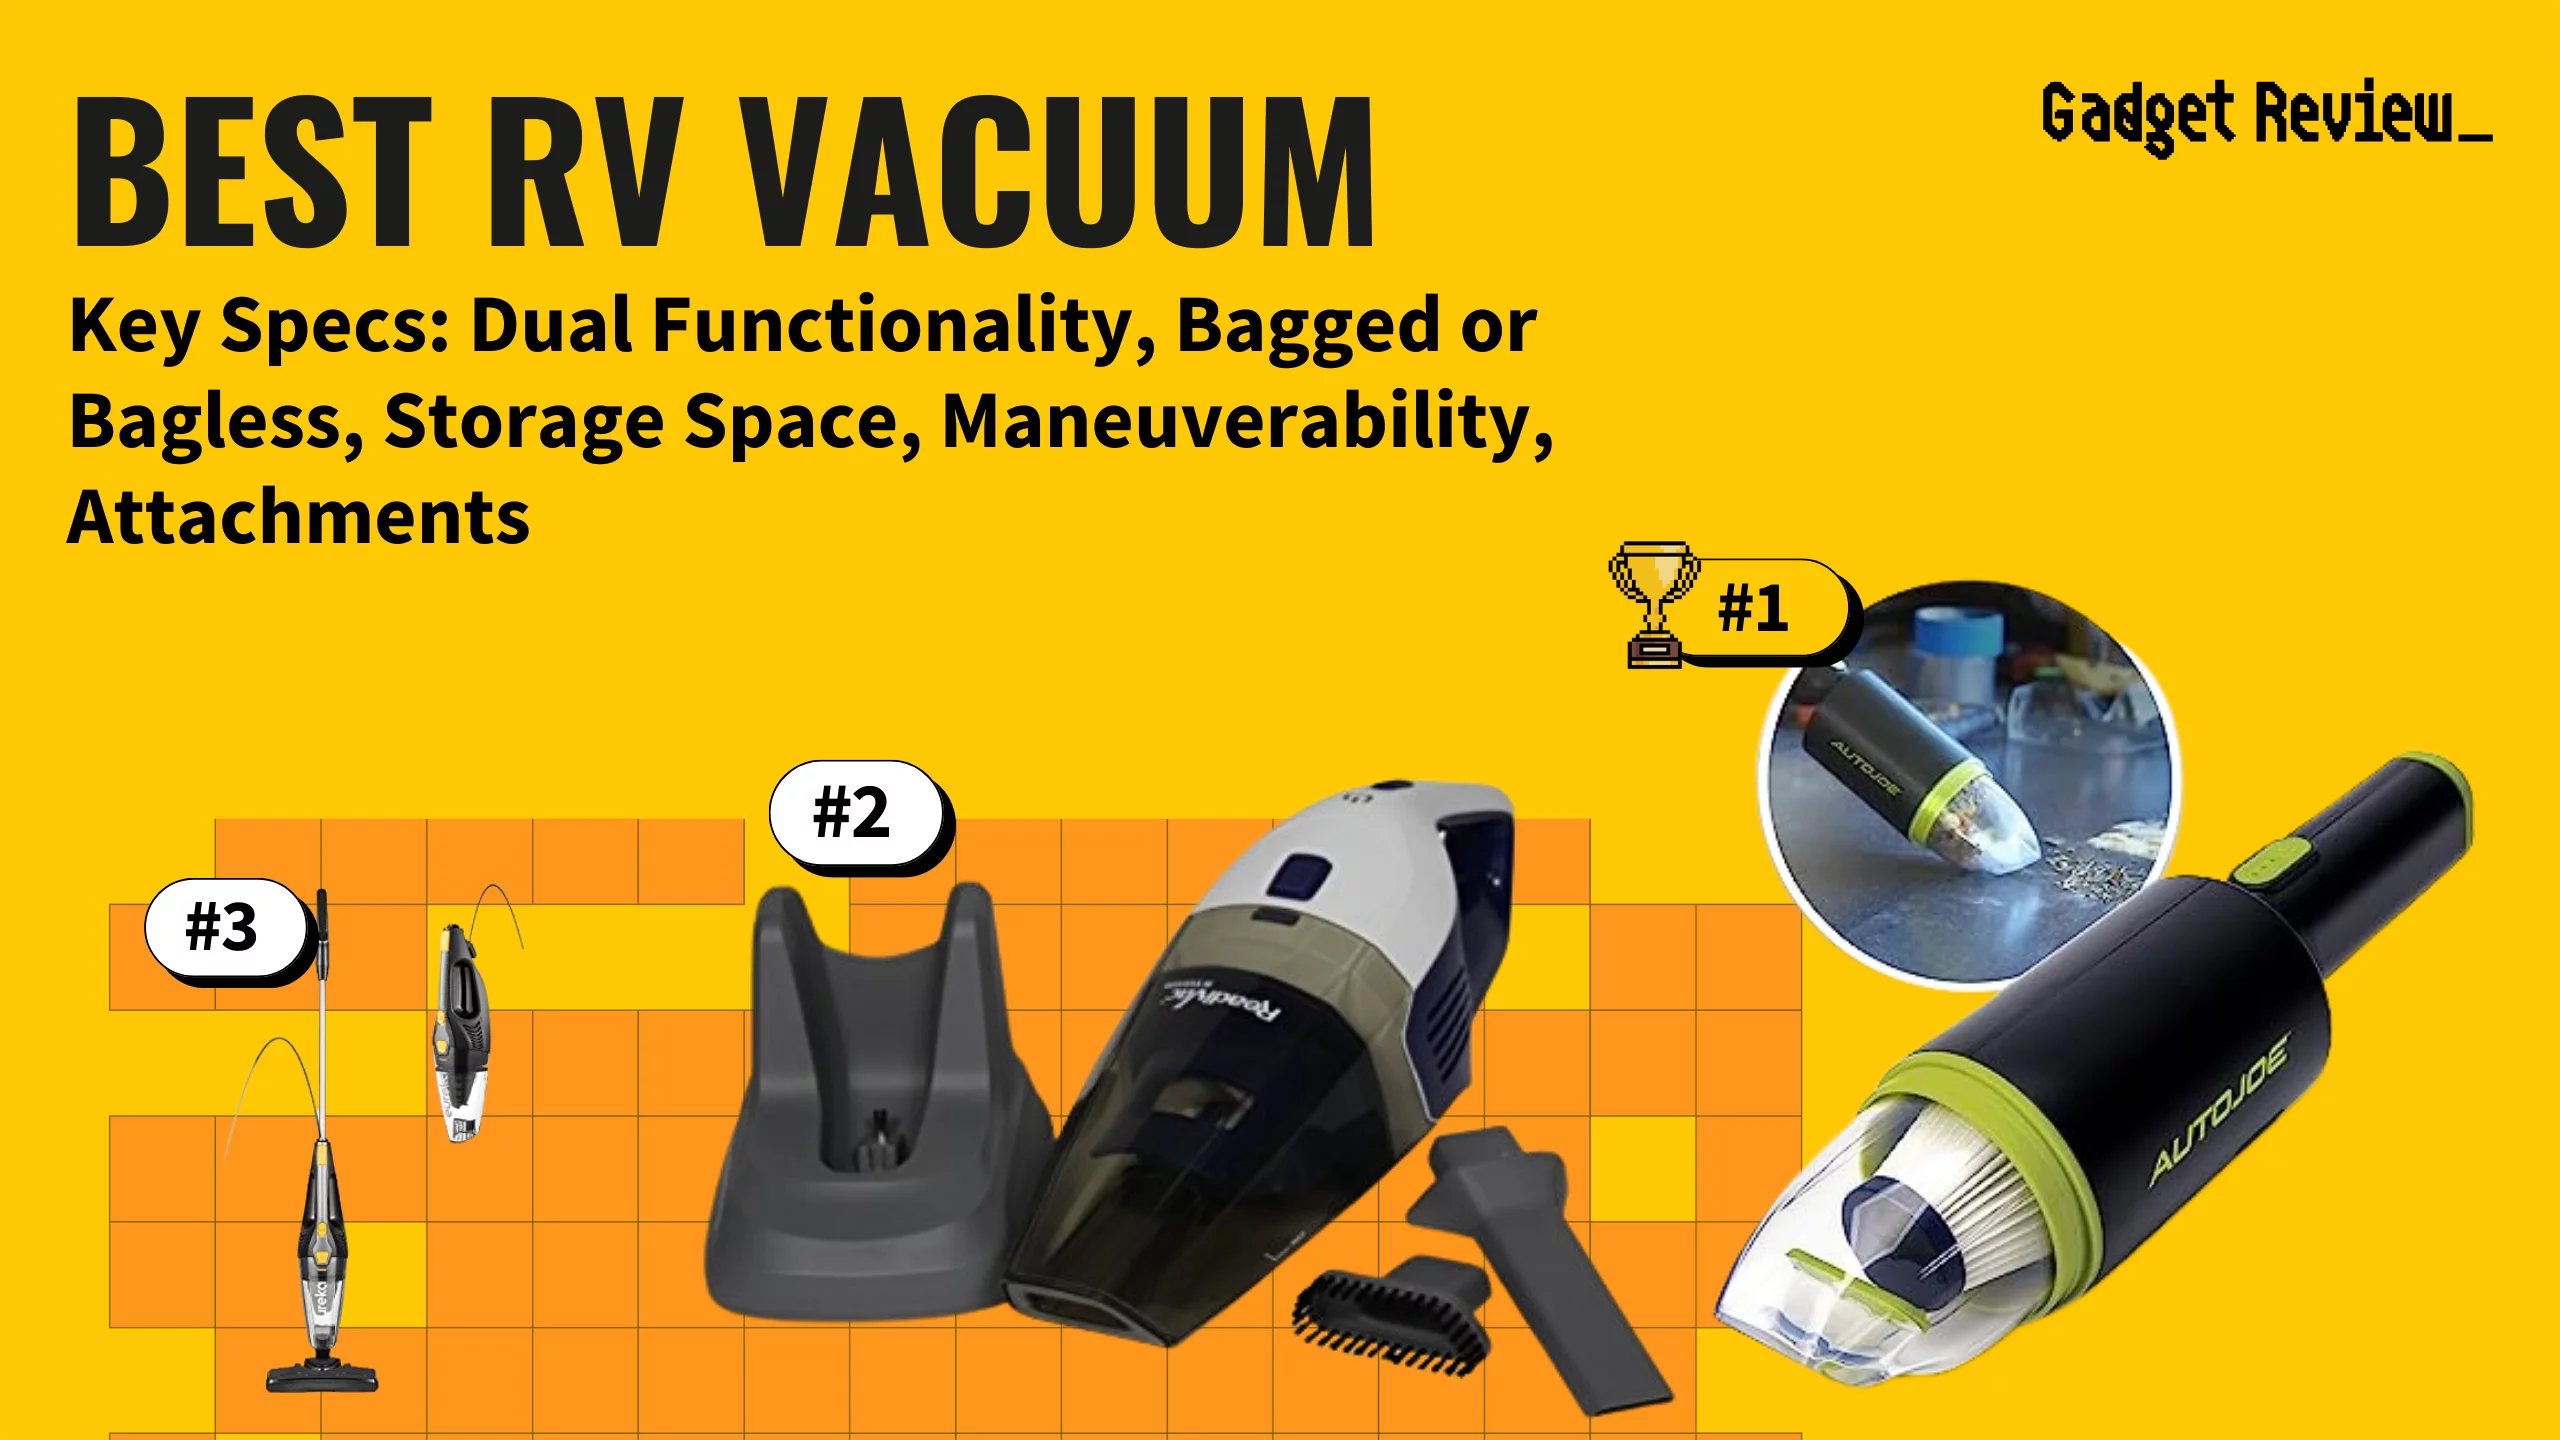 best rv vacuum guide that shows the top best vacuum cleaner model